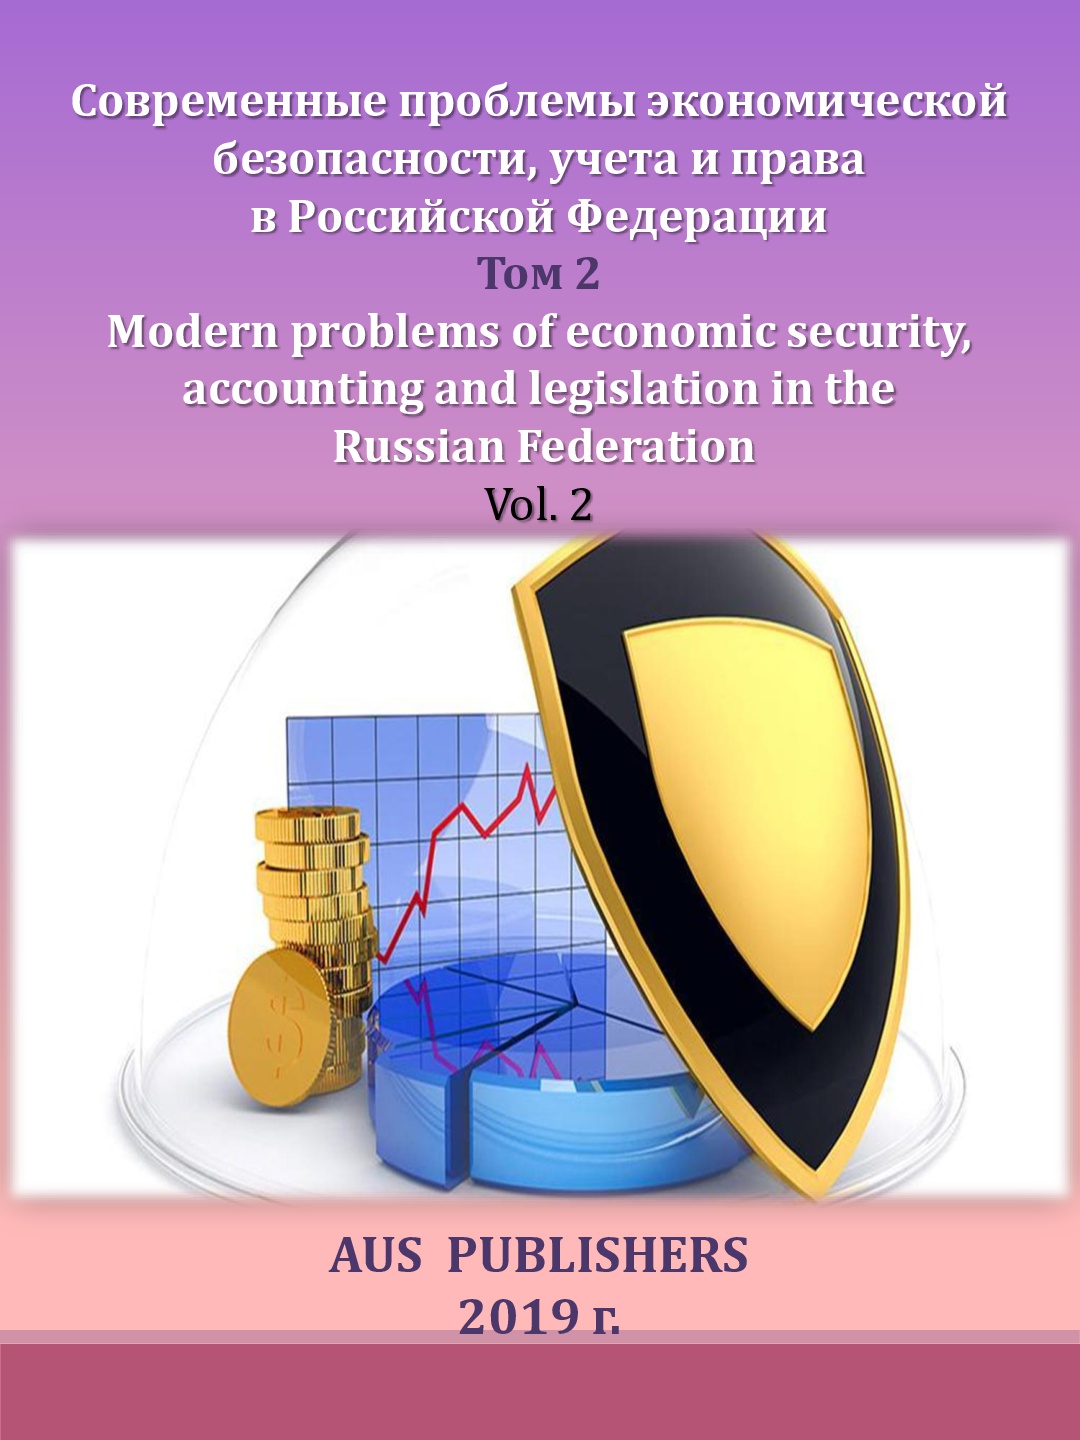                         MANAGEMENT OF BUSINESS RISKS IN THE SYSTEM OF ECONOMIC SECURITY
            